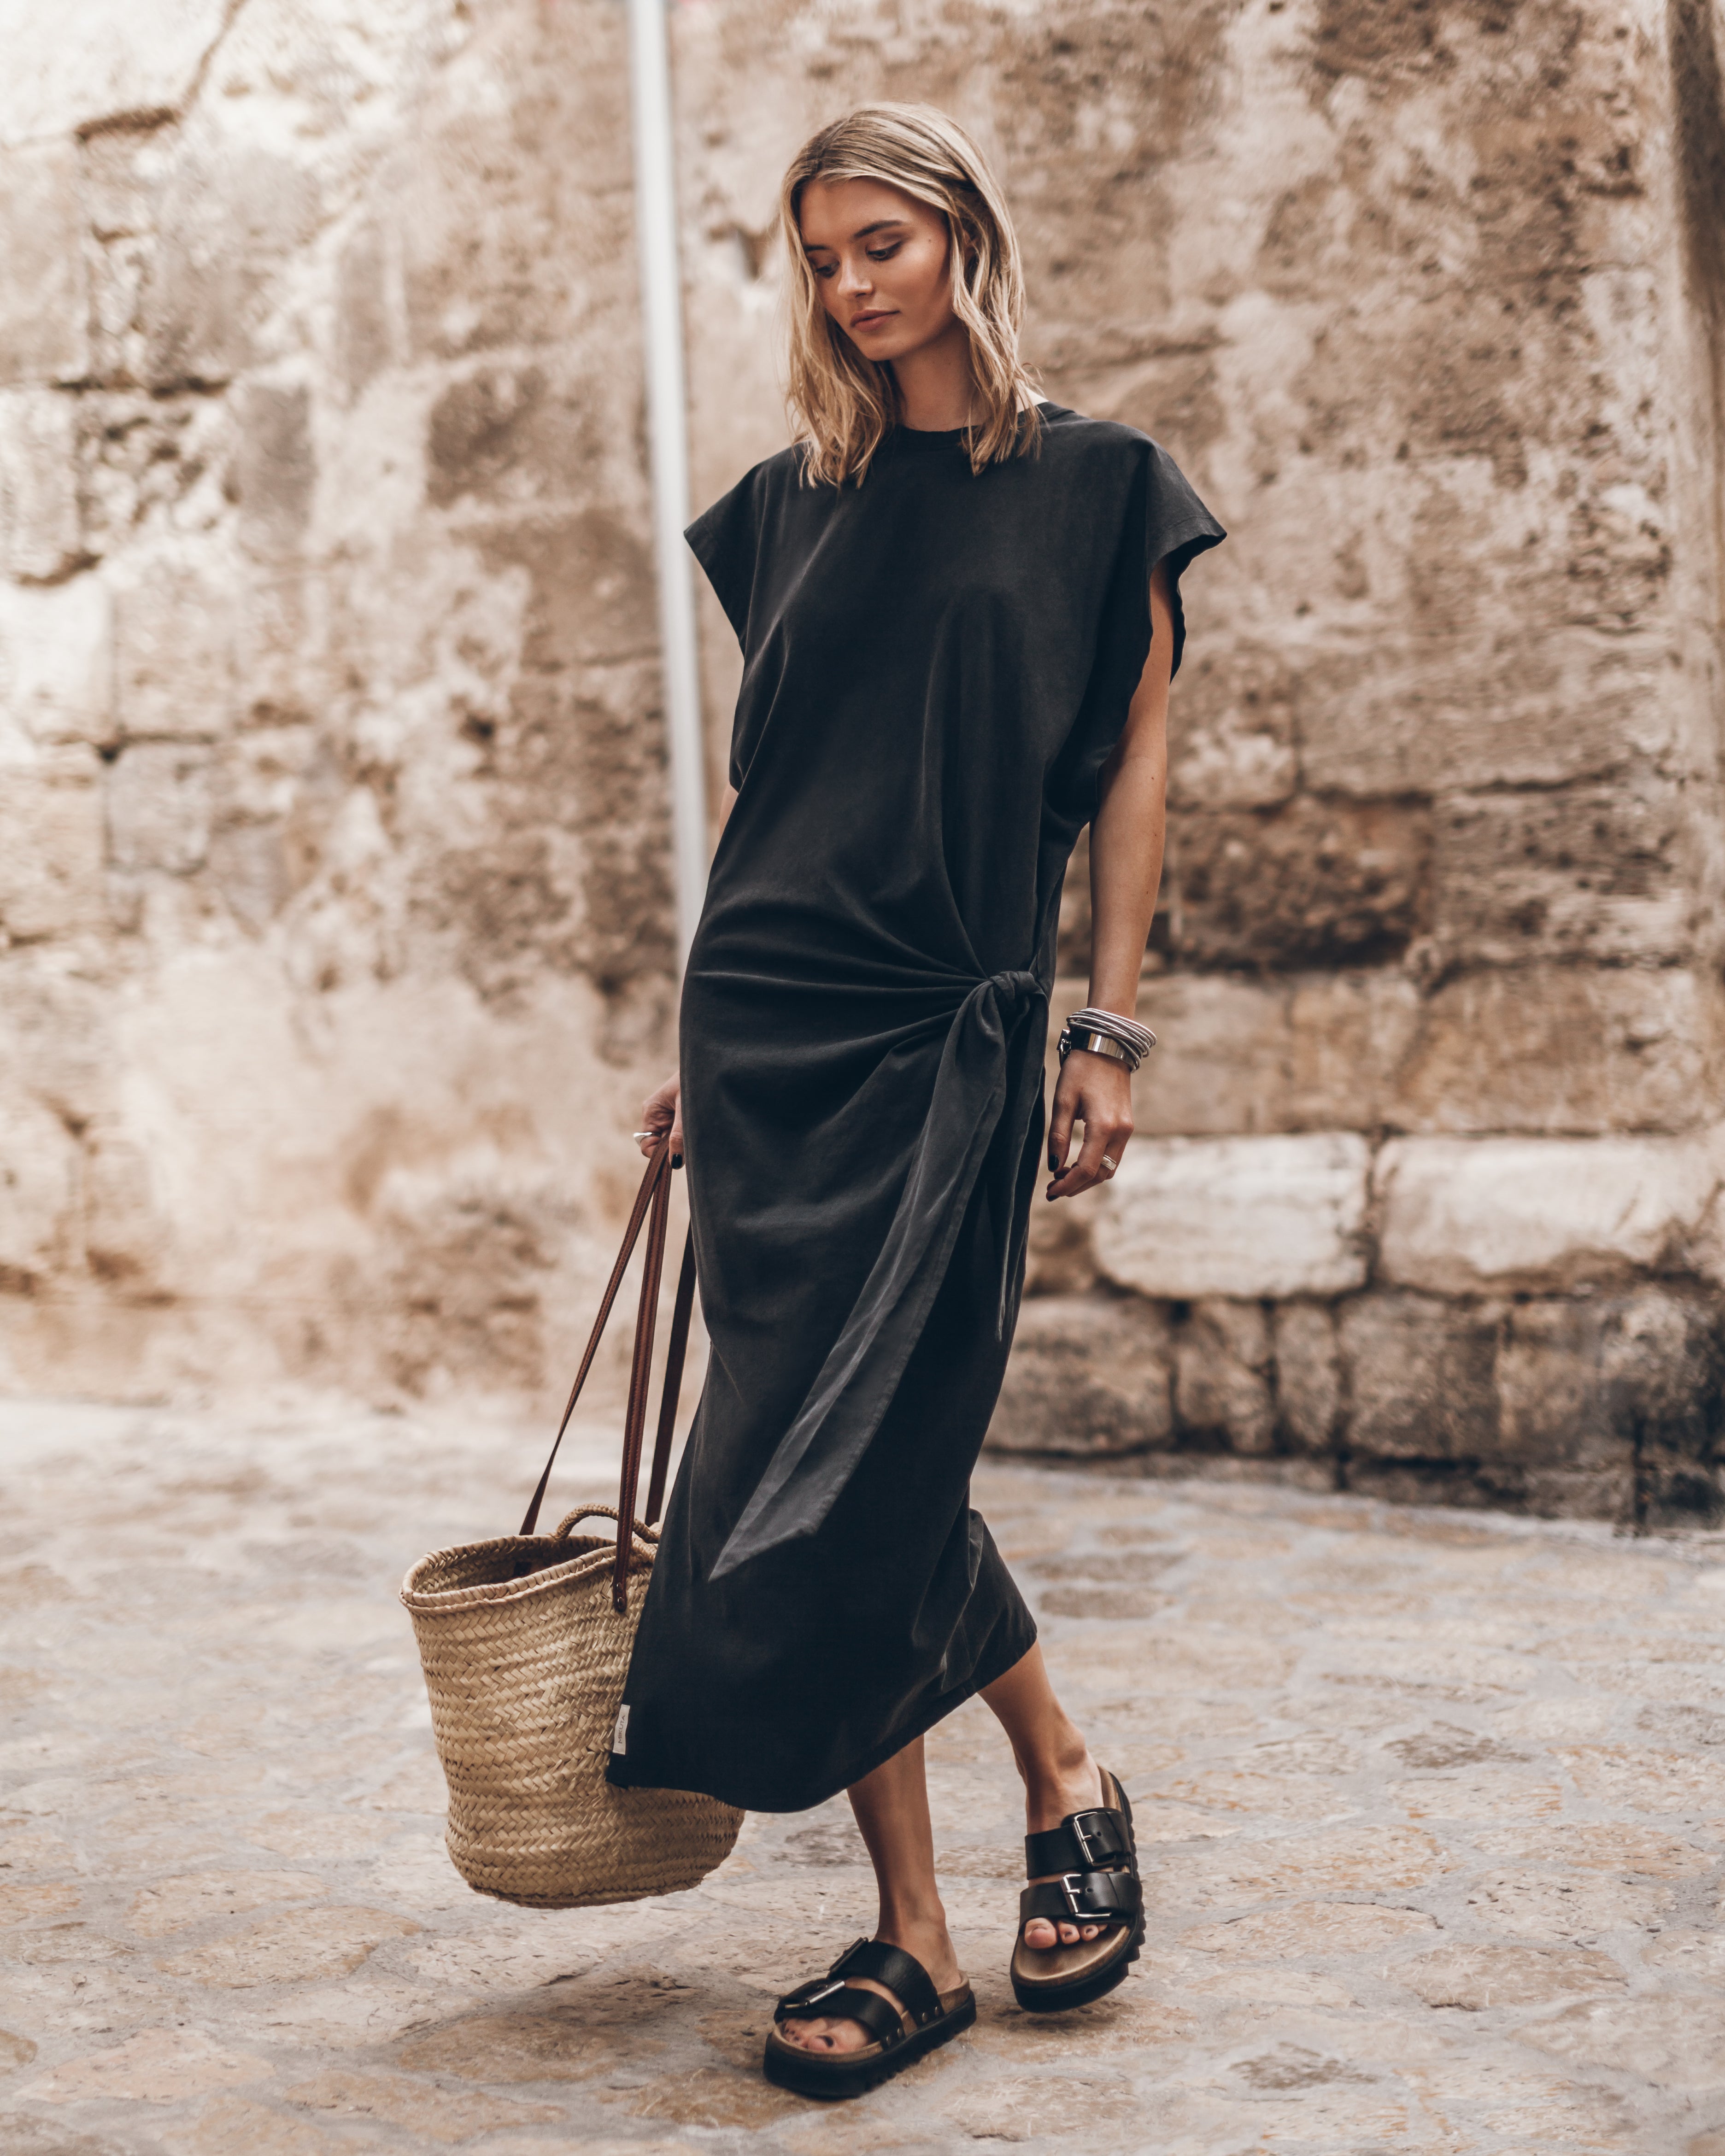 The Dark Knotted Long Batwing Dress